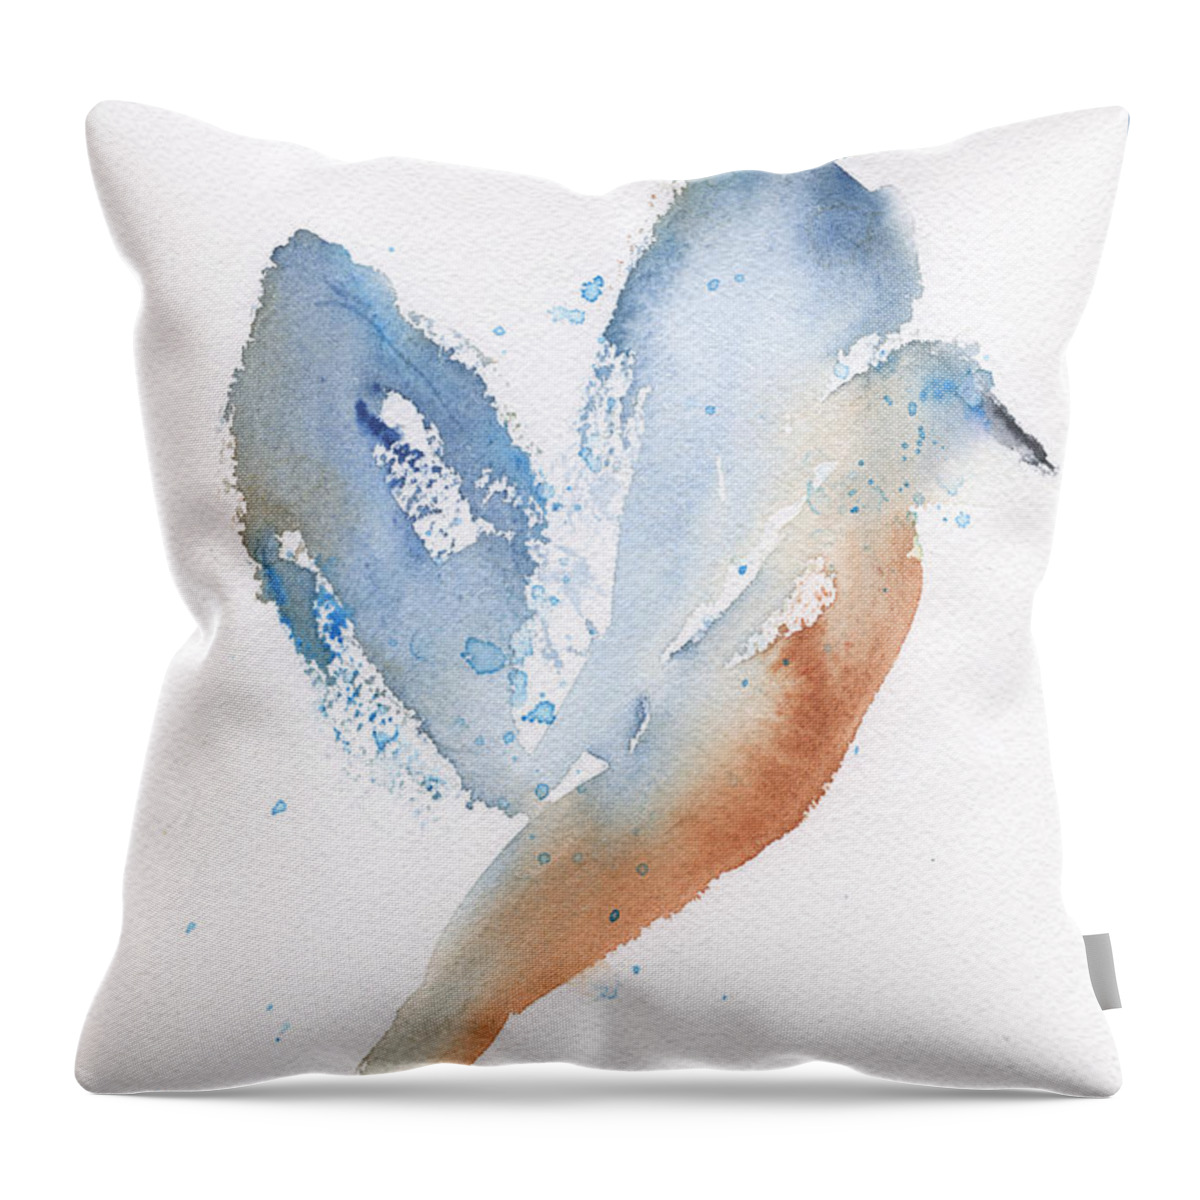 Bird Takes Flight Throw Pillow featuring the painting Bird Takes Flight by Frank Bright